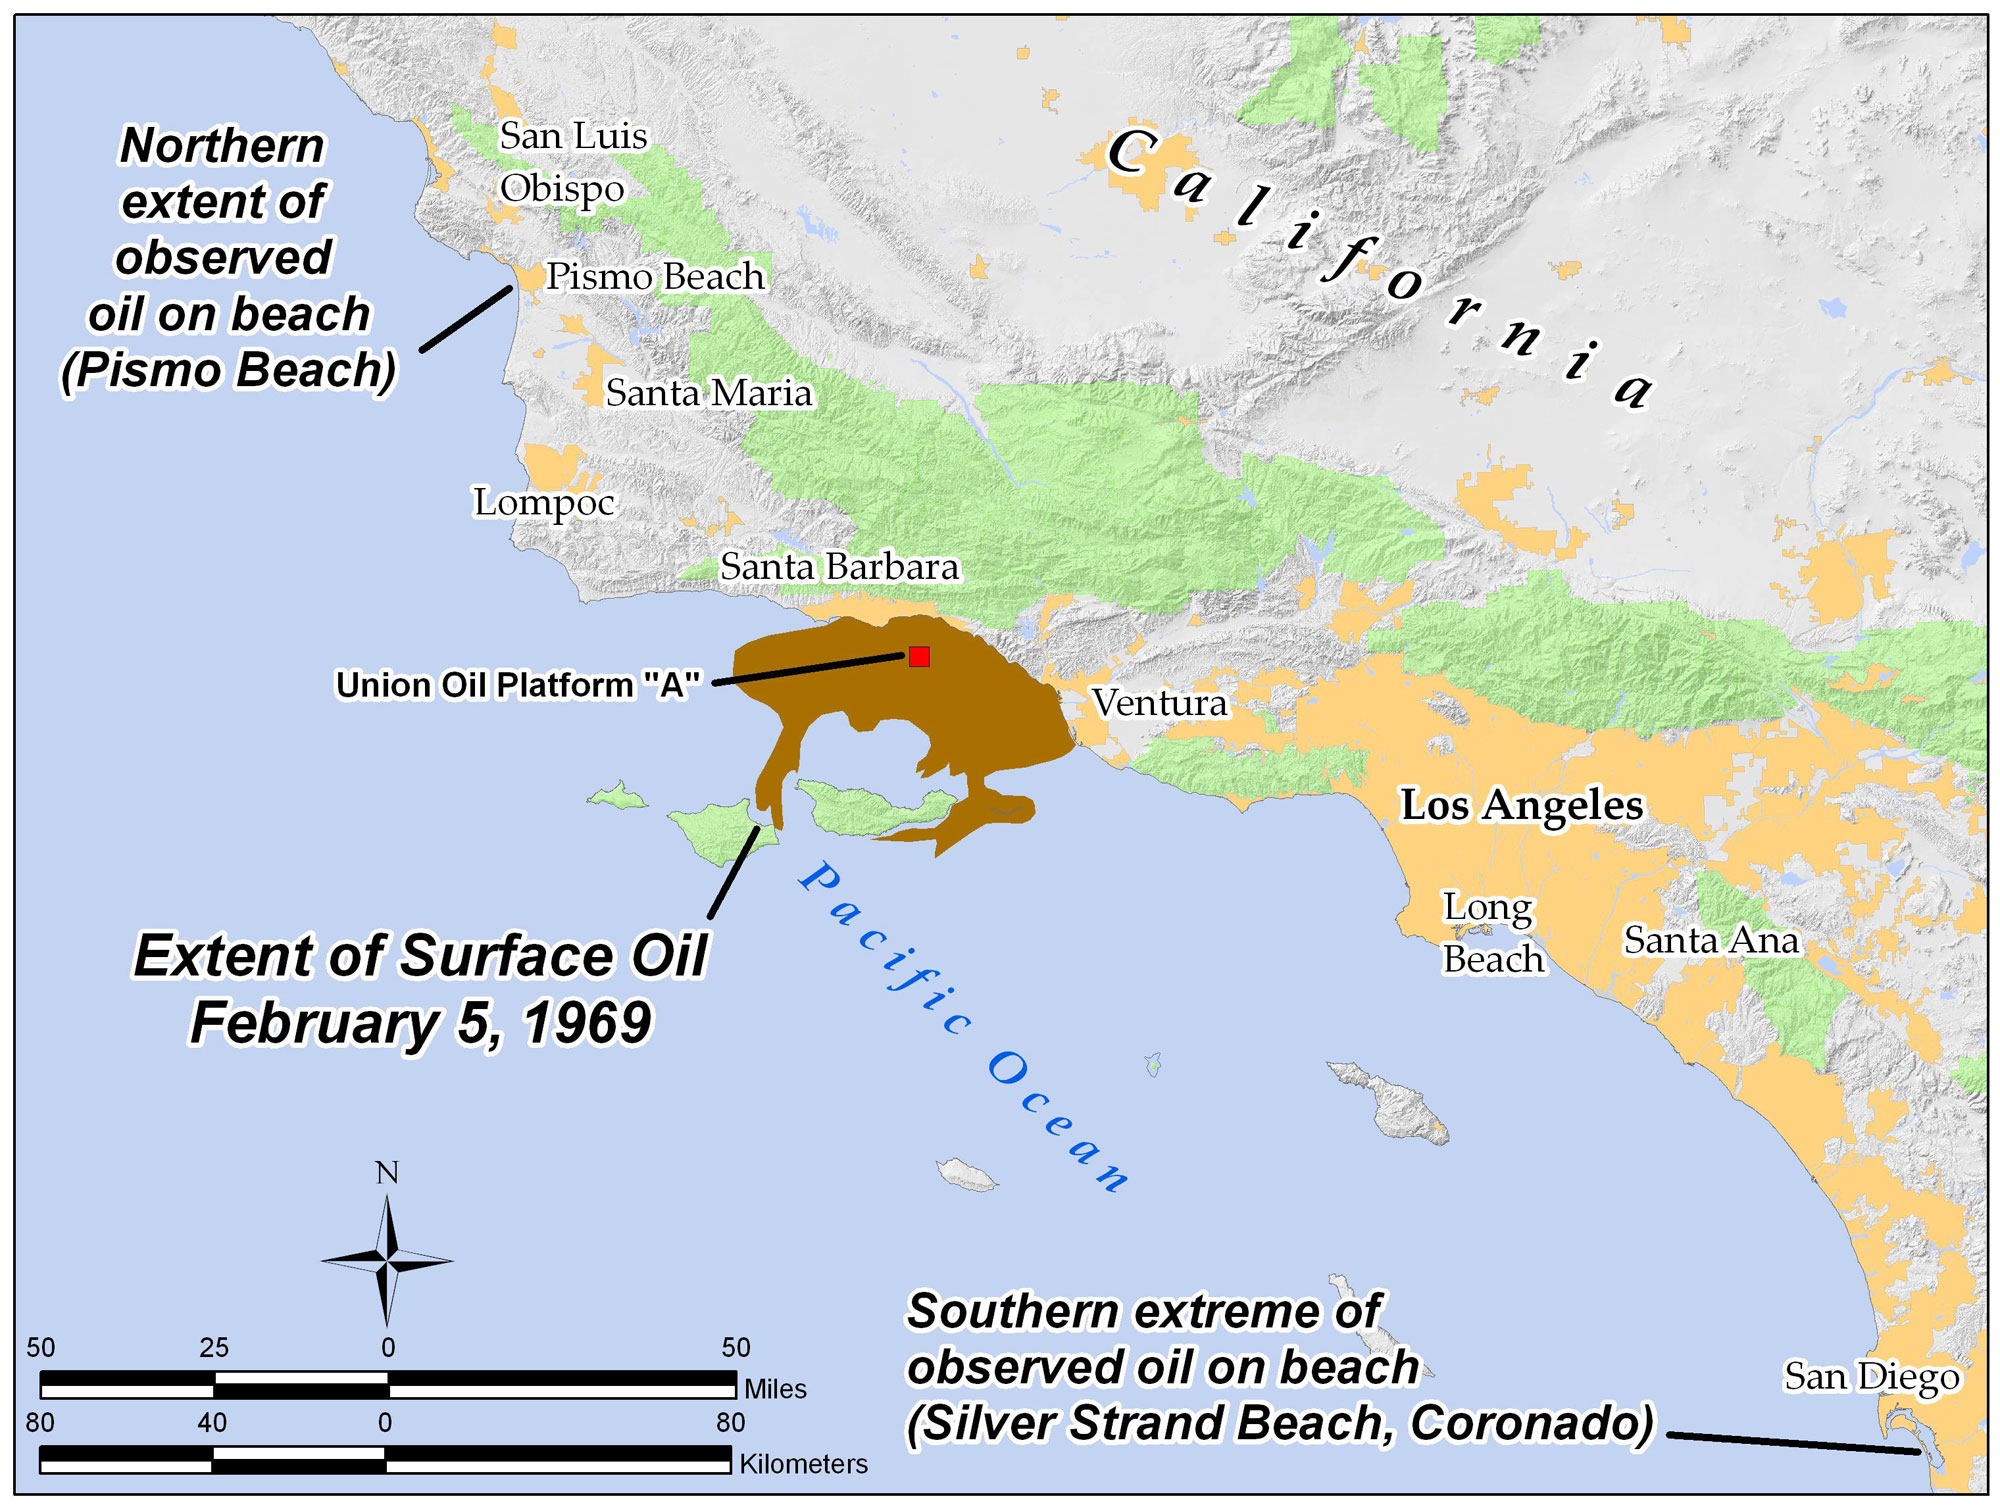 Map showing the coast of California near Santa Barbara from San Luis Obispo to San Diego showing the extent of the 1969 Santa Barbara oil spill. A region that is shaded brown near Santa Barbara is labeled as the surface oil on February 5, 1969. The map shows that oil appeared as far north as Pismo Beach and as far south as Silver Strand Beach in Coronado.